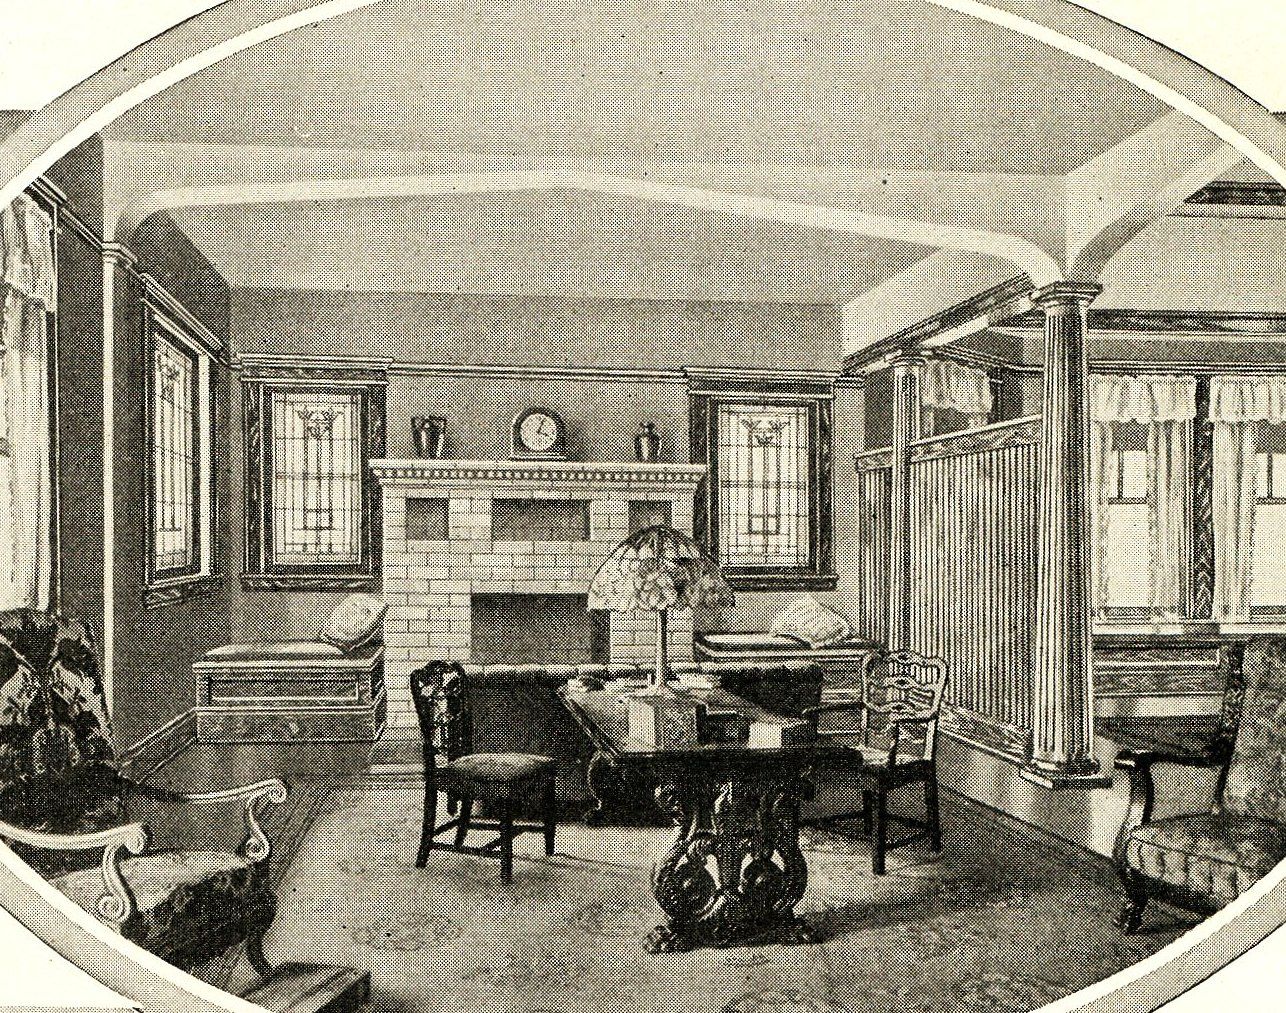 The 1919 Sears Modern Homes catalog shows the dining room, which was massive.